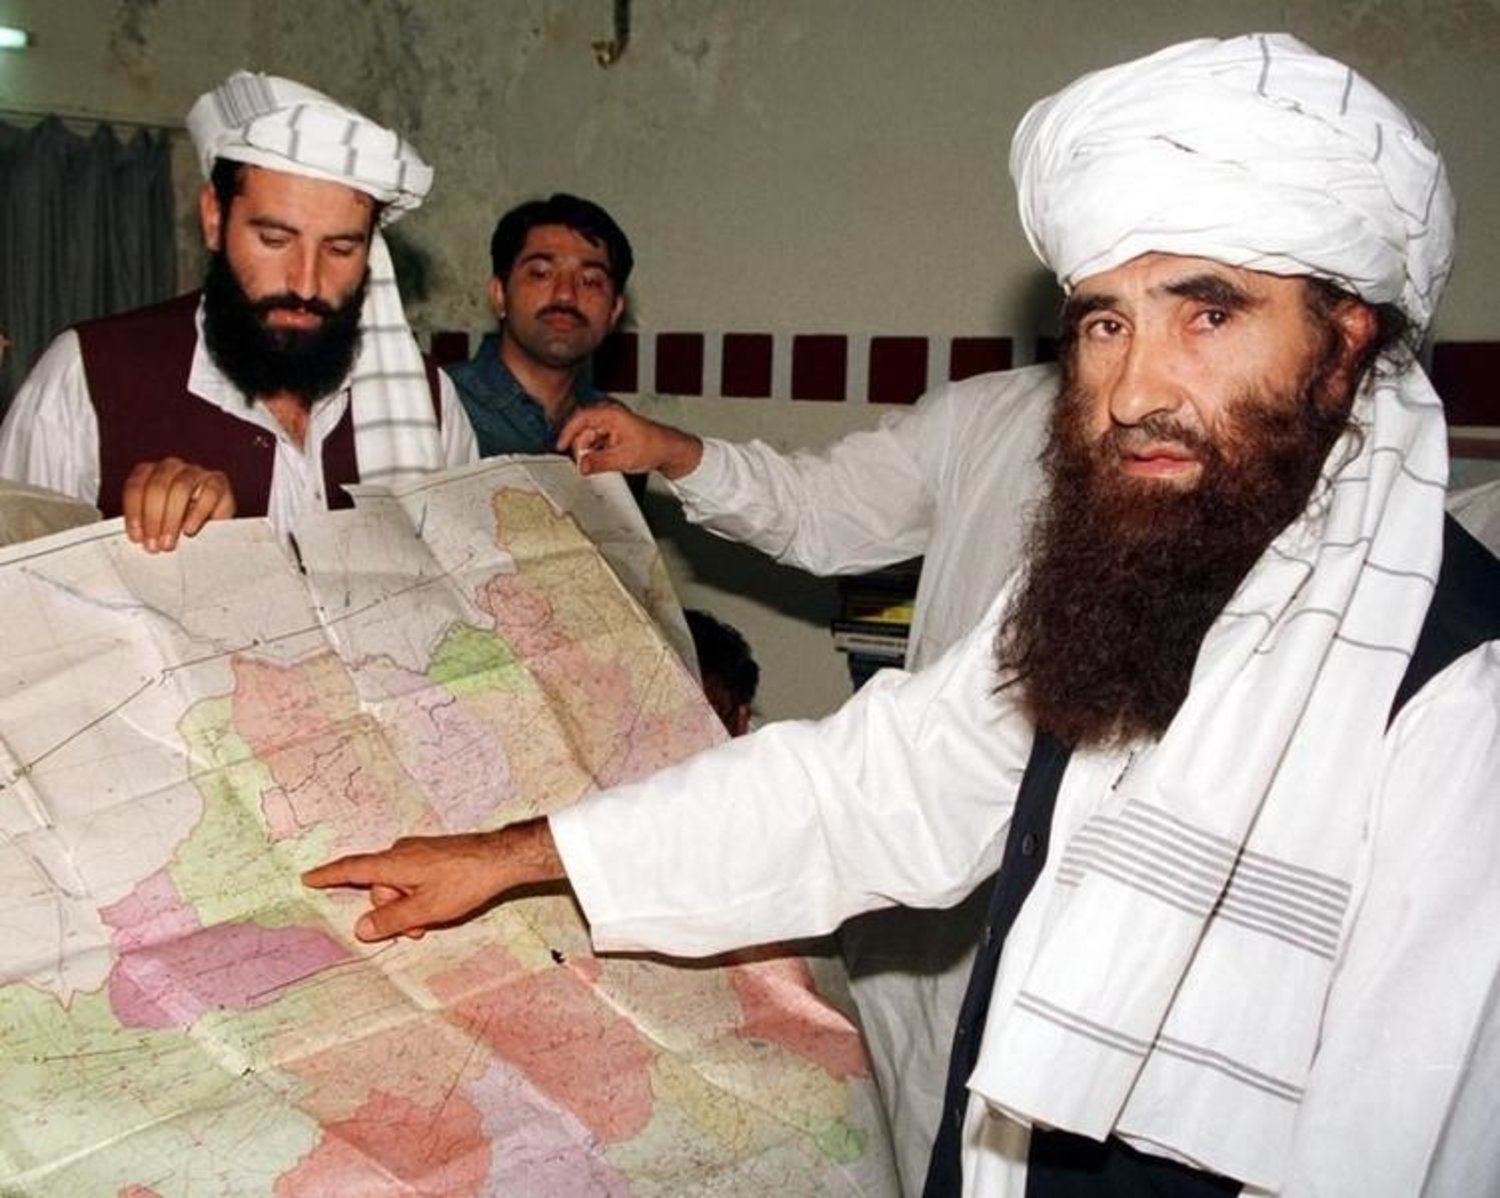 Jalaluddin Haqqani (R), the Taliban's Minister for Tribal Affairs, points to a map of Afghanistan during a visit to Islamabad, Pakistan while his son Naziruddin (L) looks on. (Reuters 2001 file photo)